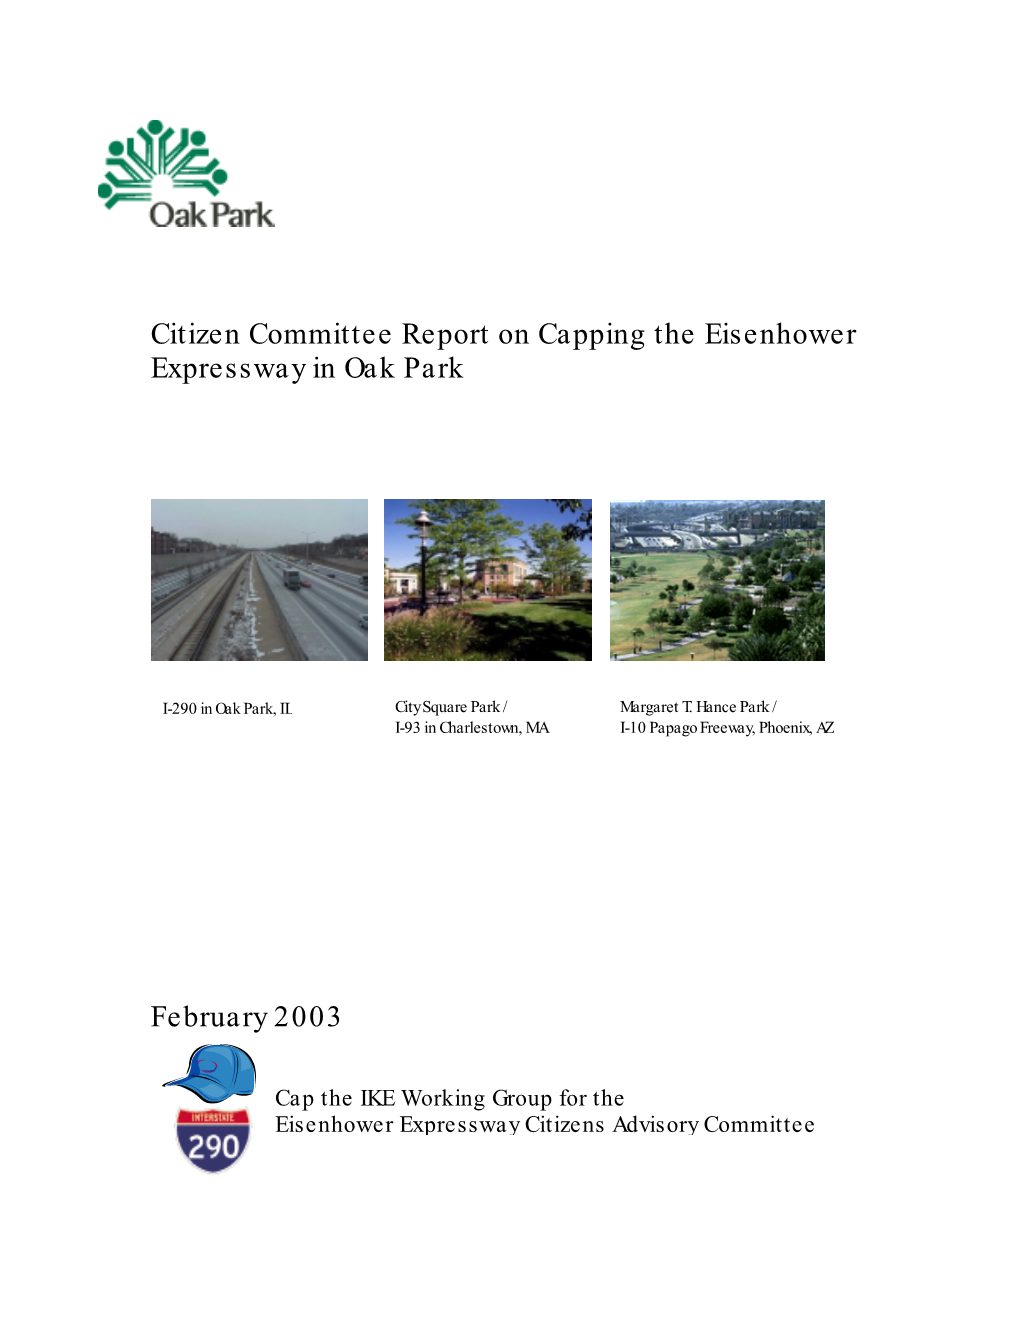 Citizen Committee Report on Capping the Eisenhower Expressway in Oak Park